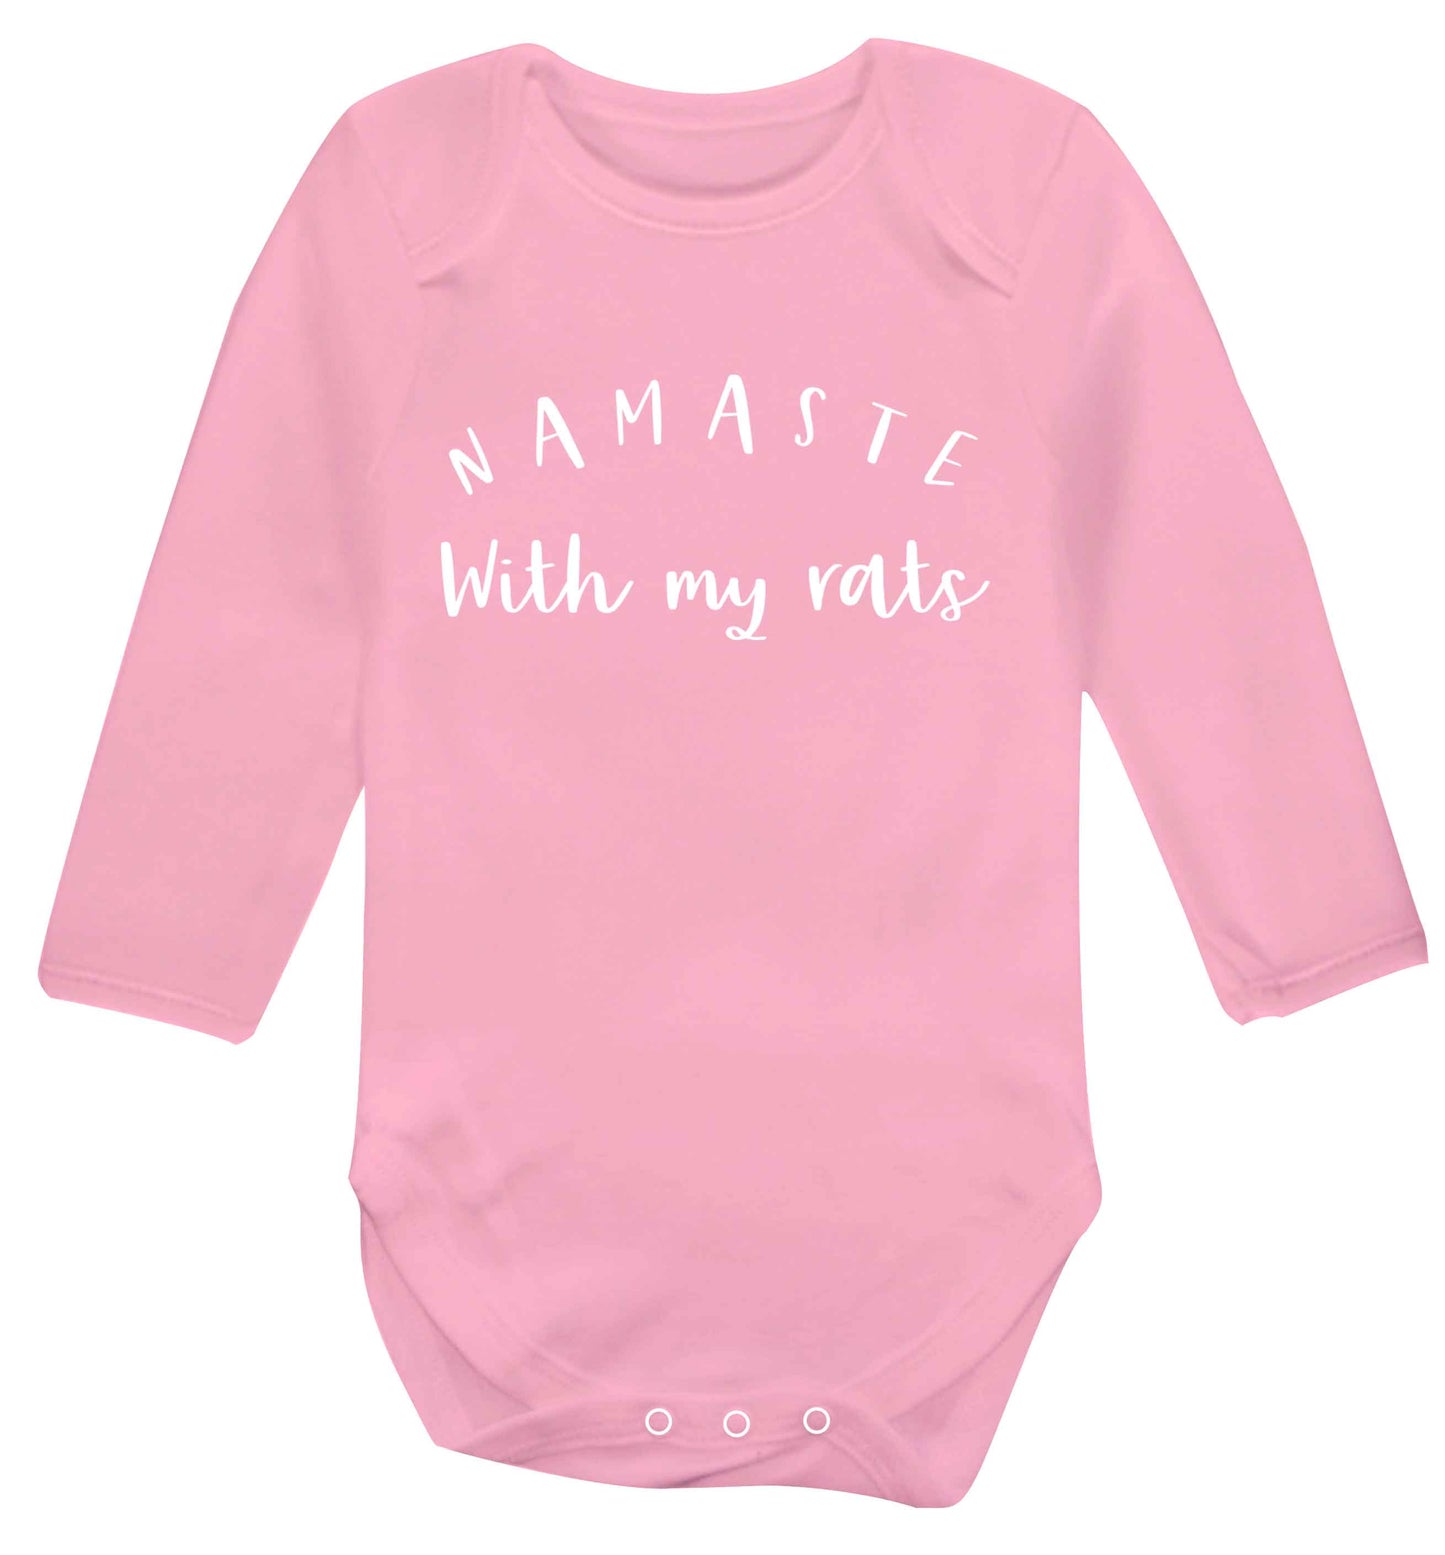 Namaste with my rats Baby Vest long sleeved pale pink 6-12 months